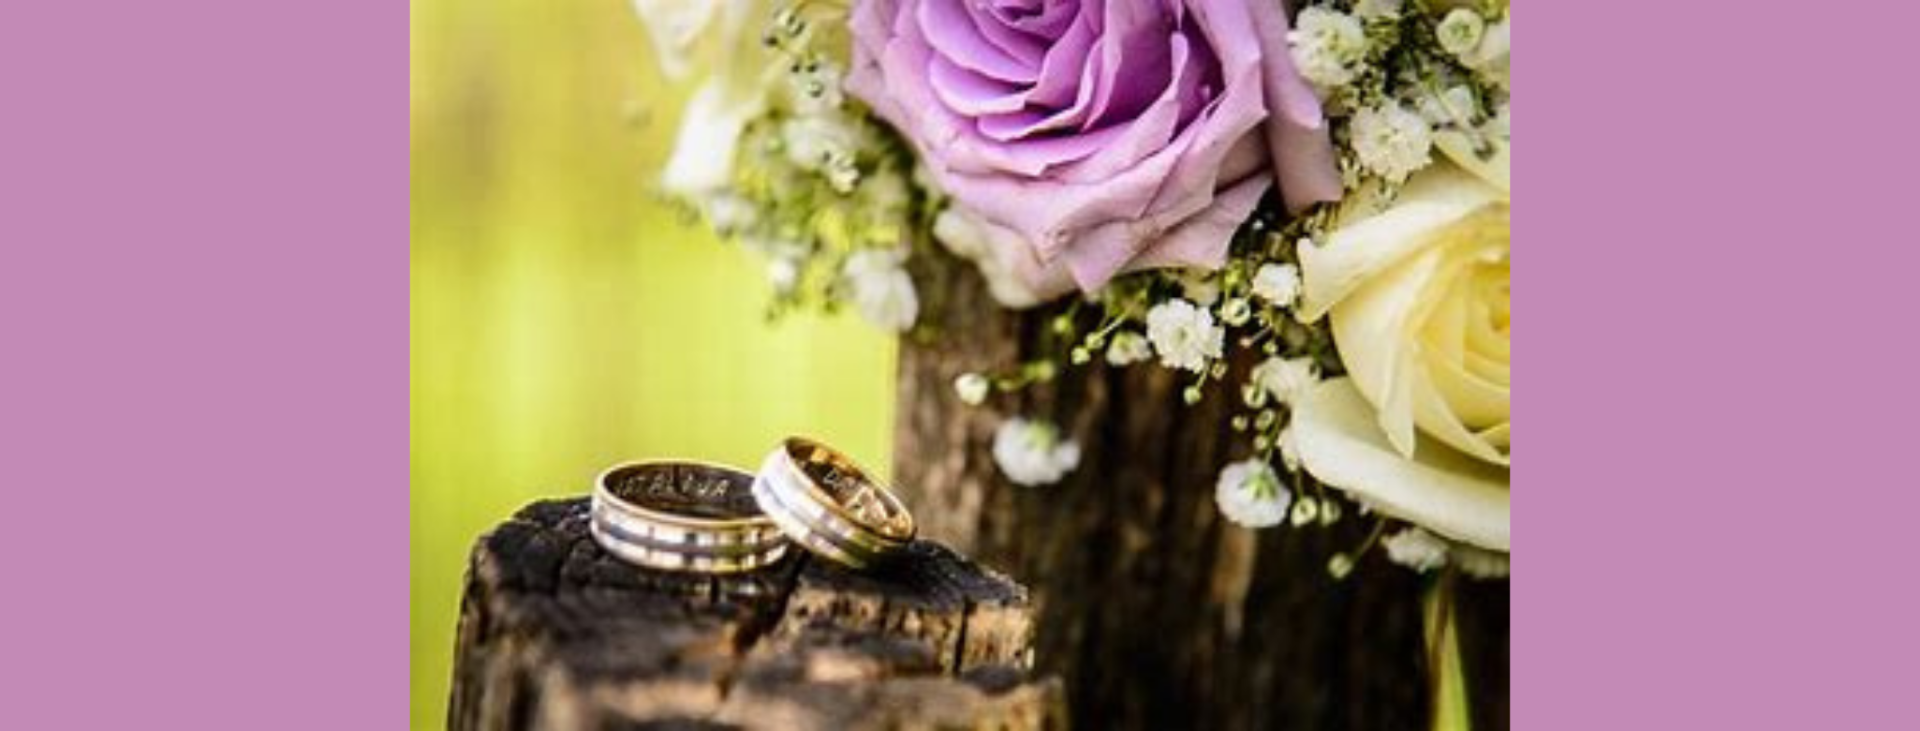 diamond wedding bands with roses